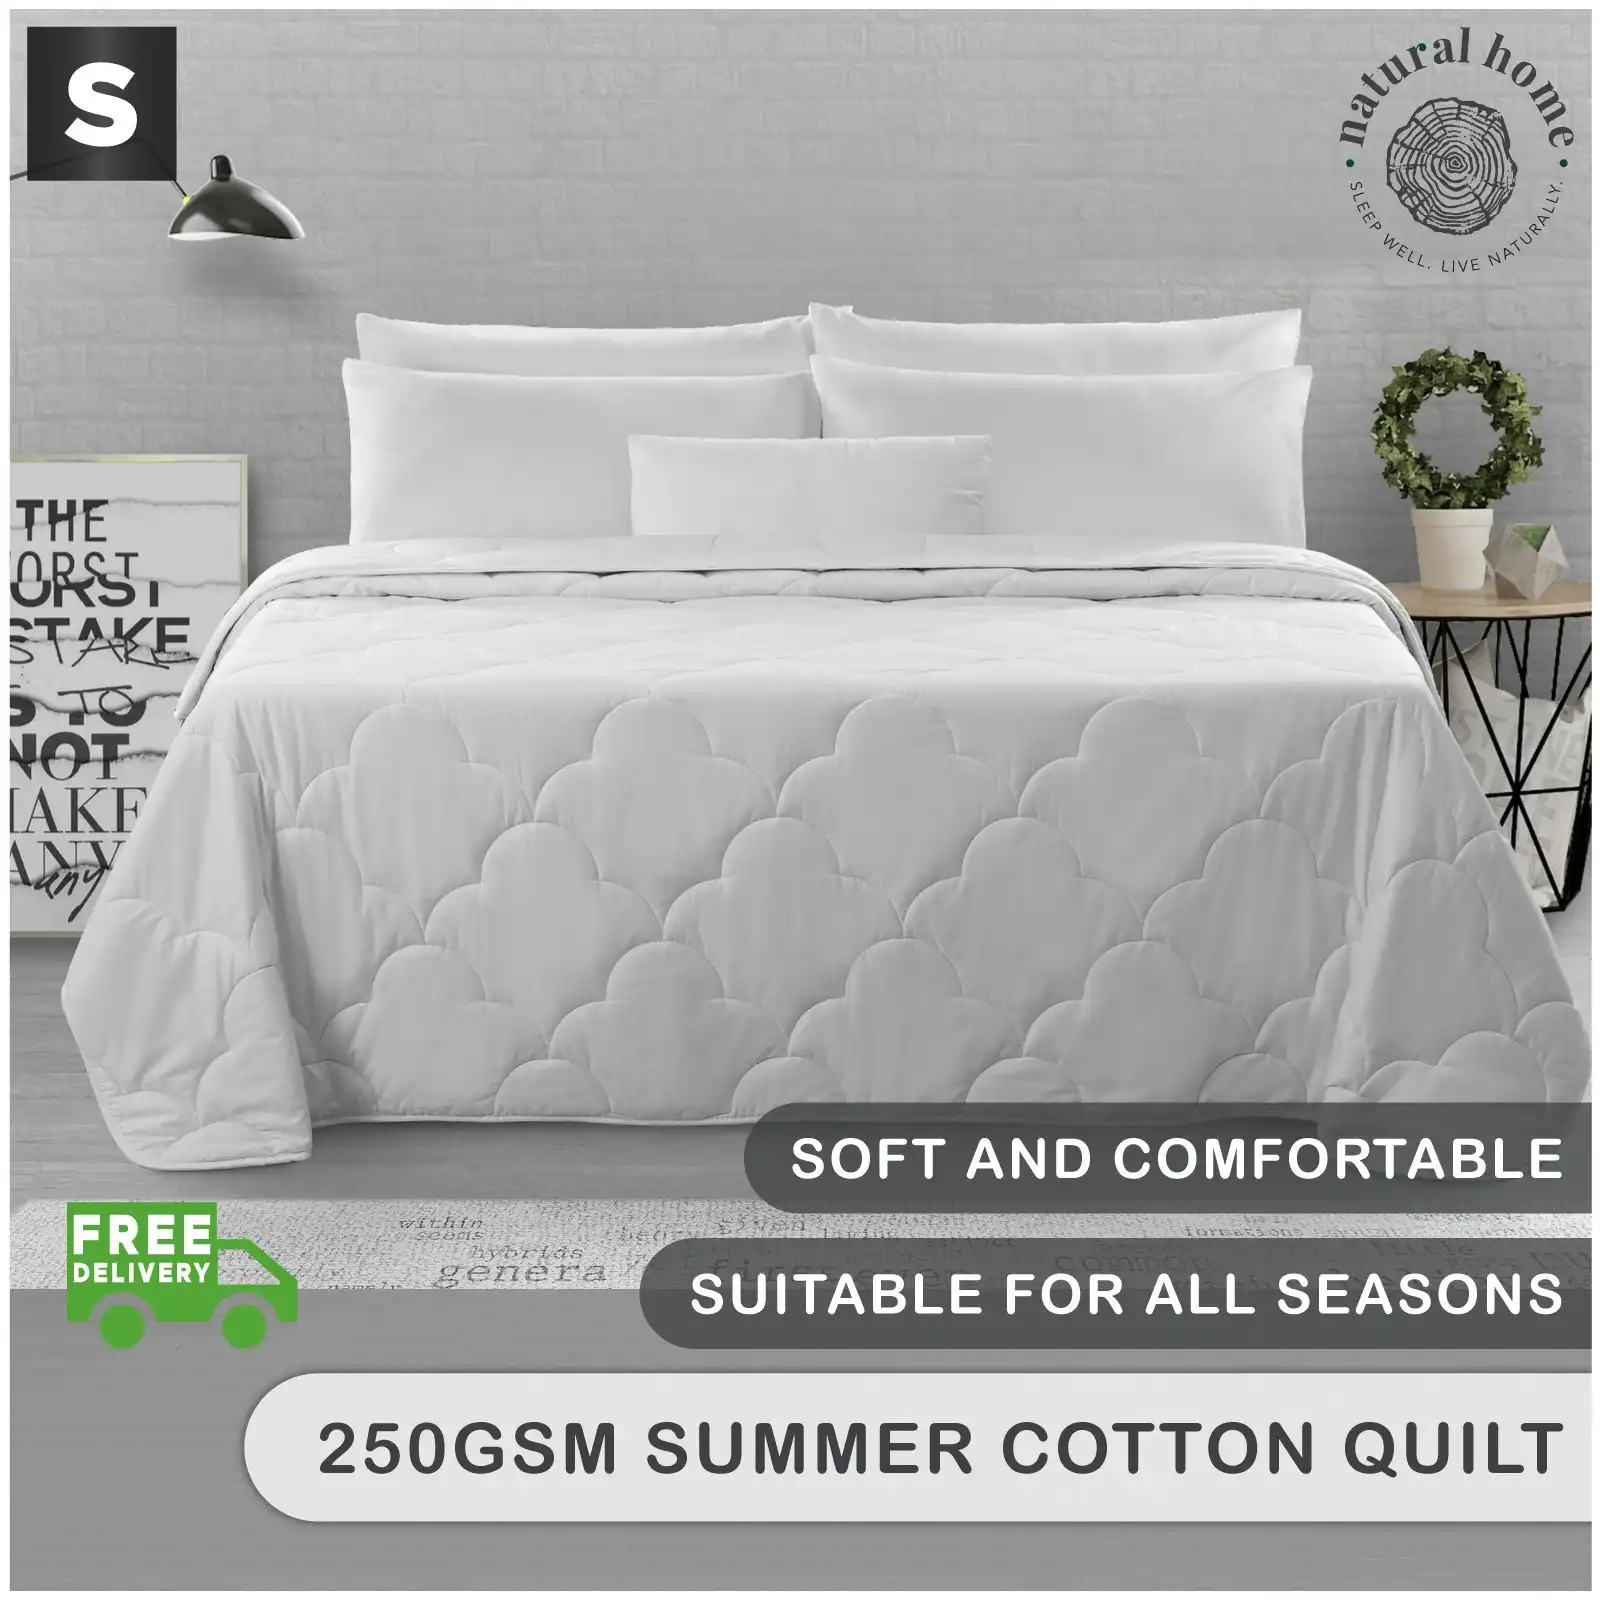 Natural Home Summer Cotton Quilt 250gsm - White - Single Bed